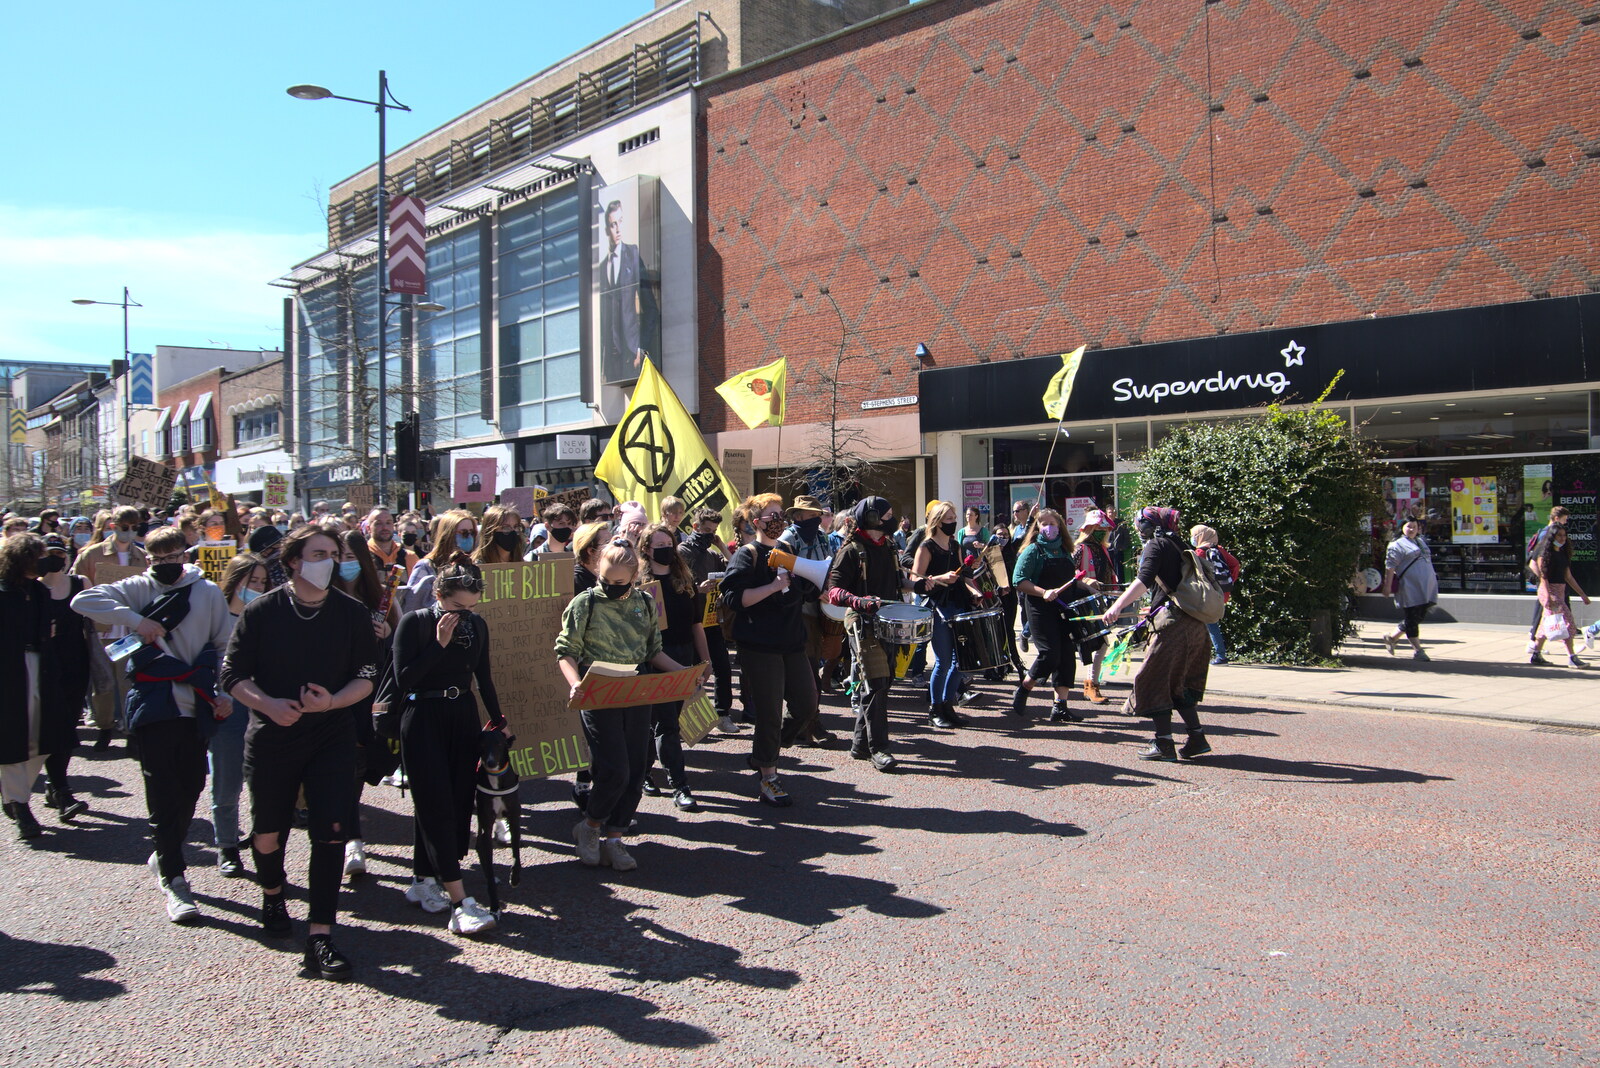 The demonstration passes by Superdrug from The Death of Debenhams, Rampant Horse Street, Norwich, Norfolk - 17th April 2021